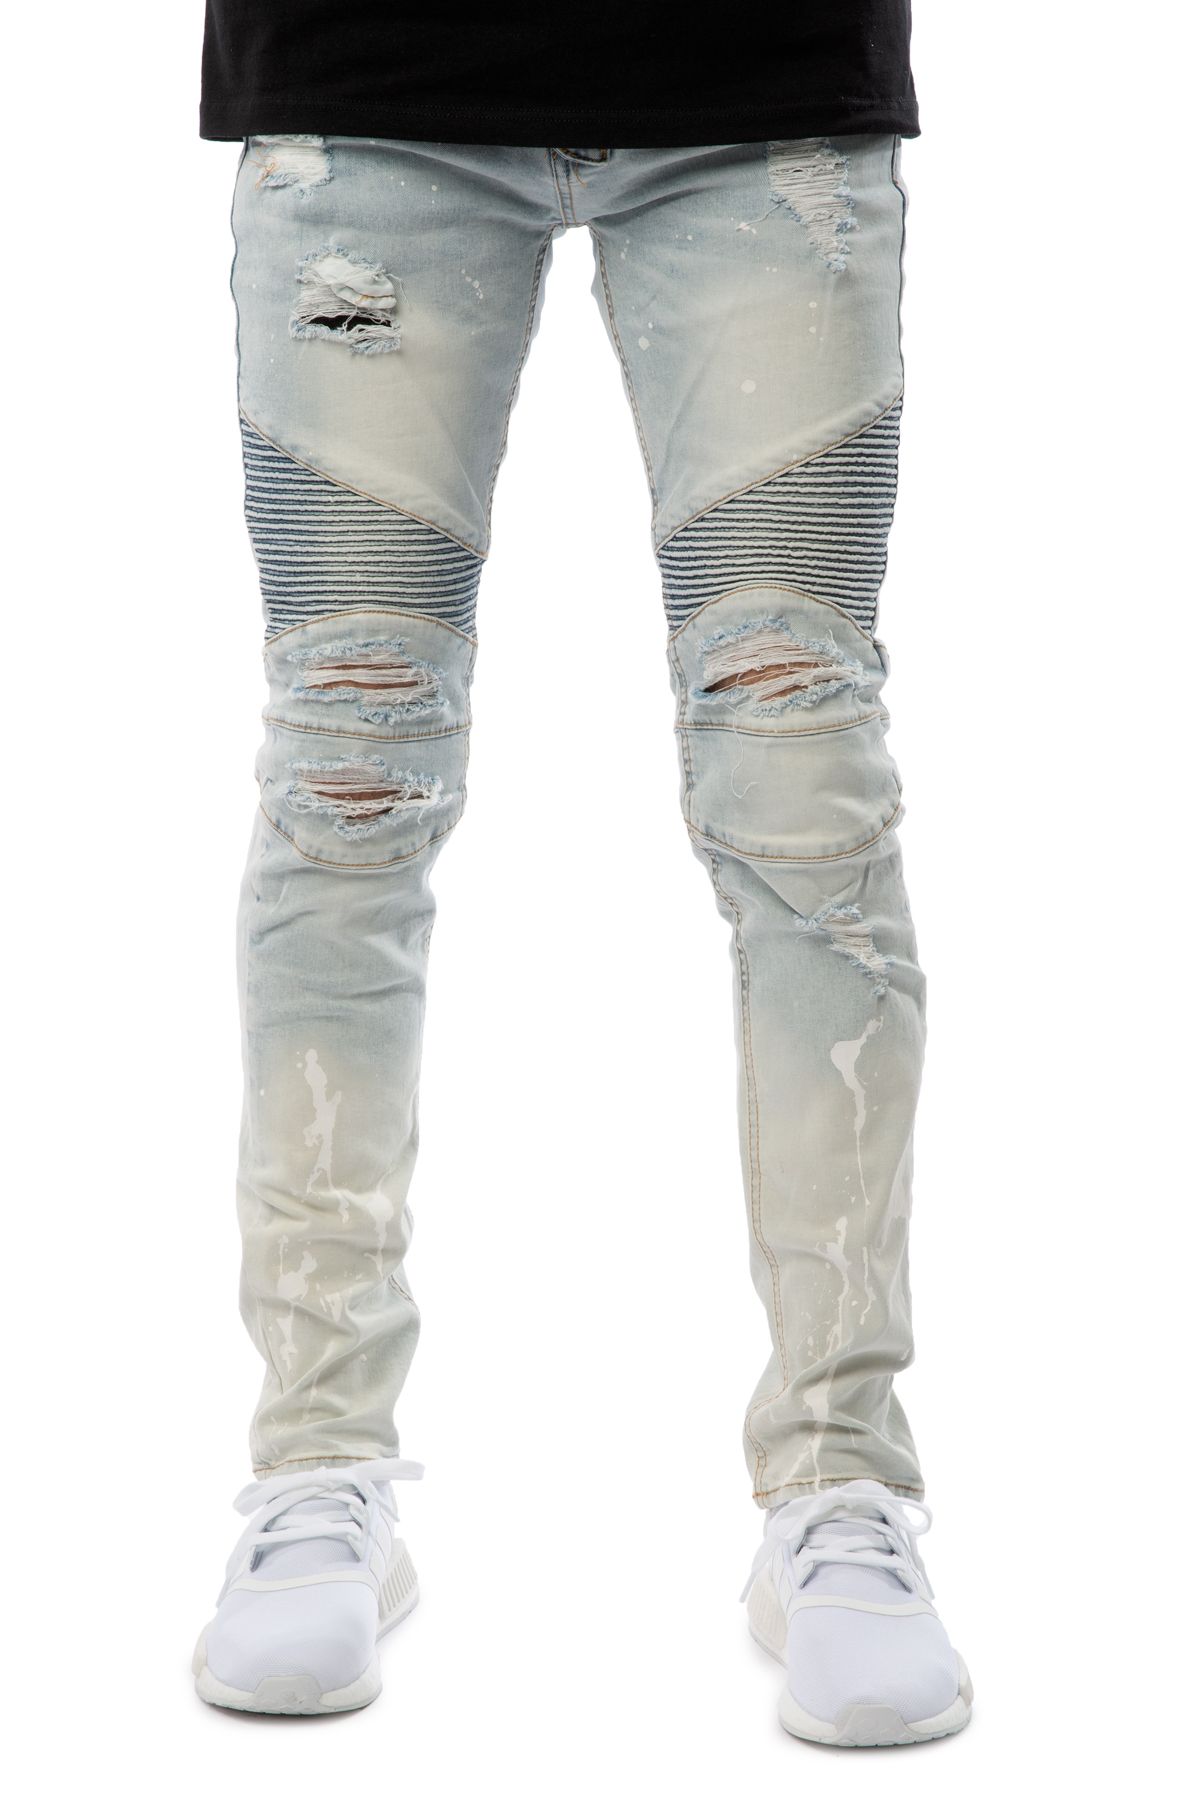 KDNK Romulous Jeans KND4211-ICE - Shiekh